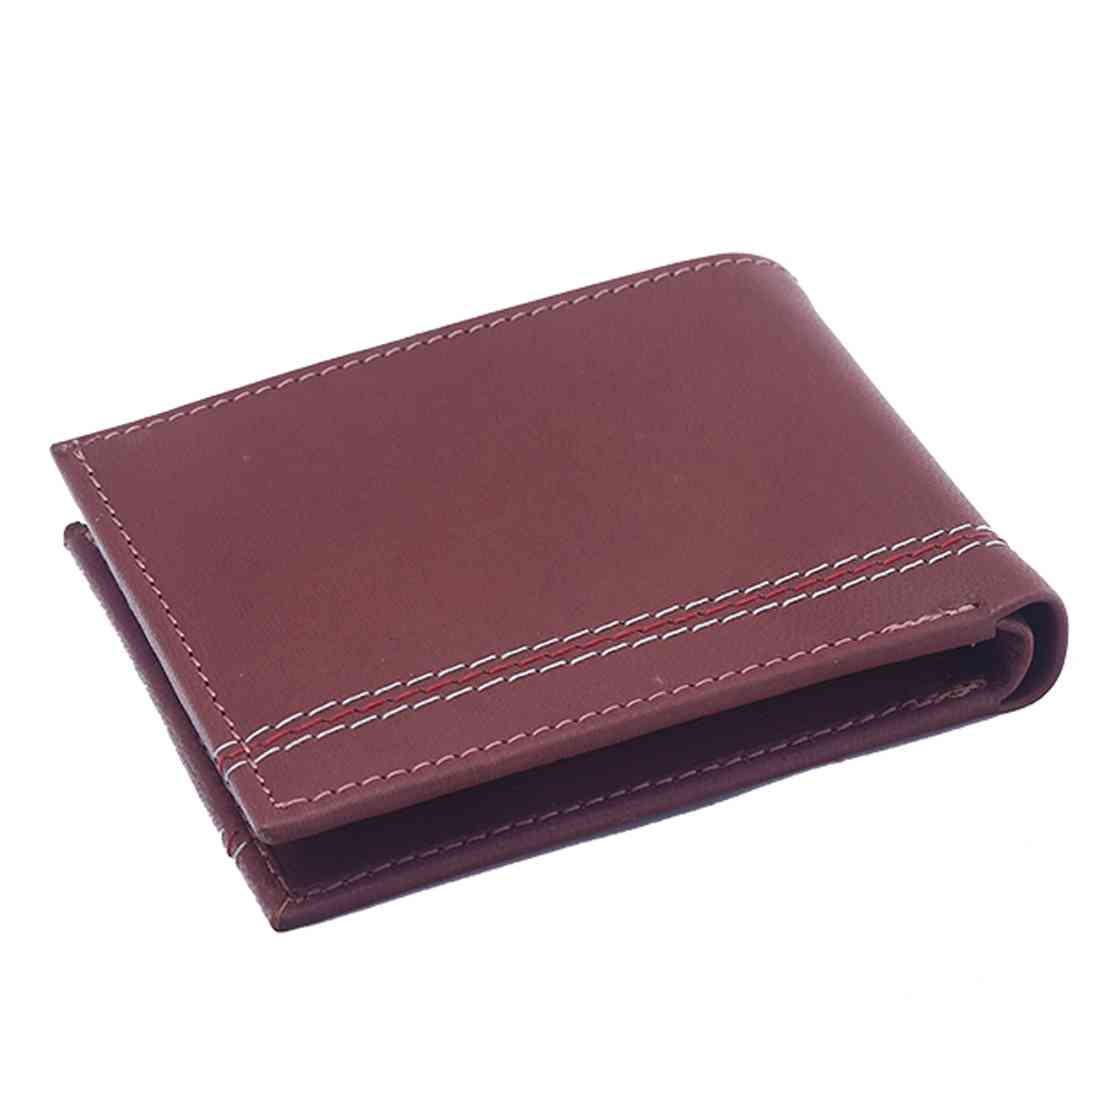 OHM New York Triple Lined Leather Wallet